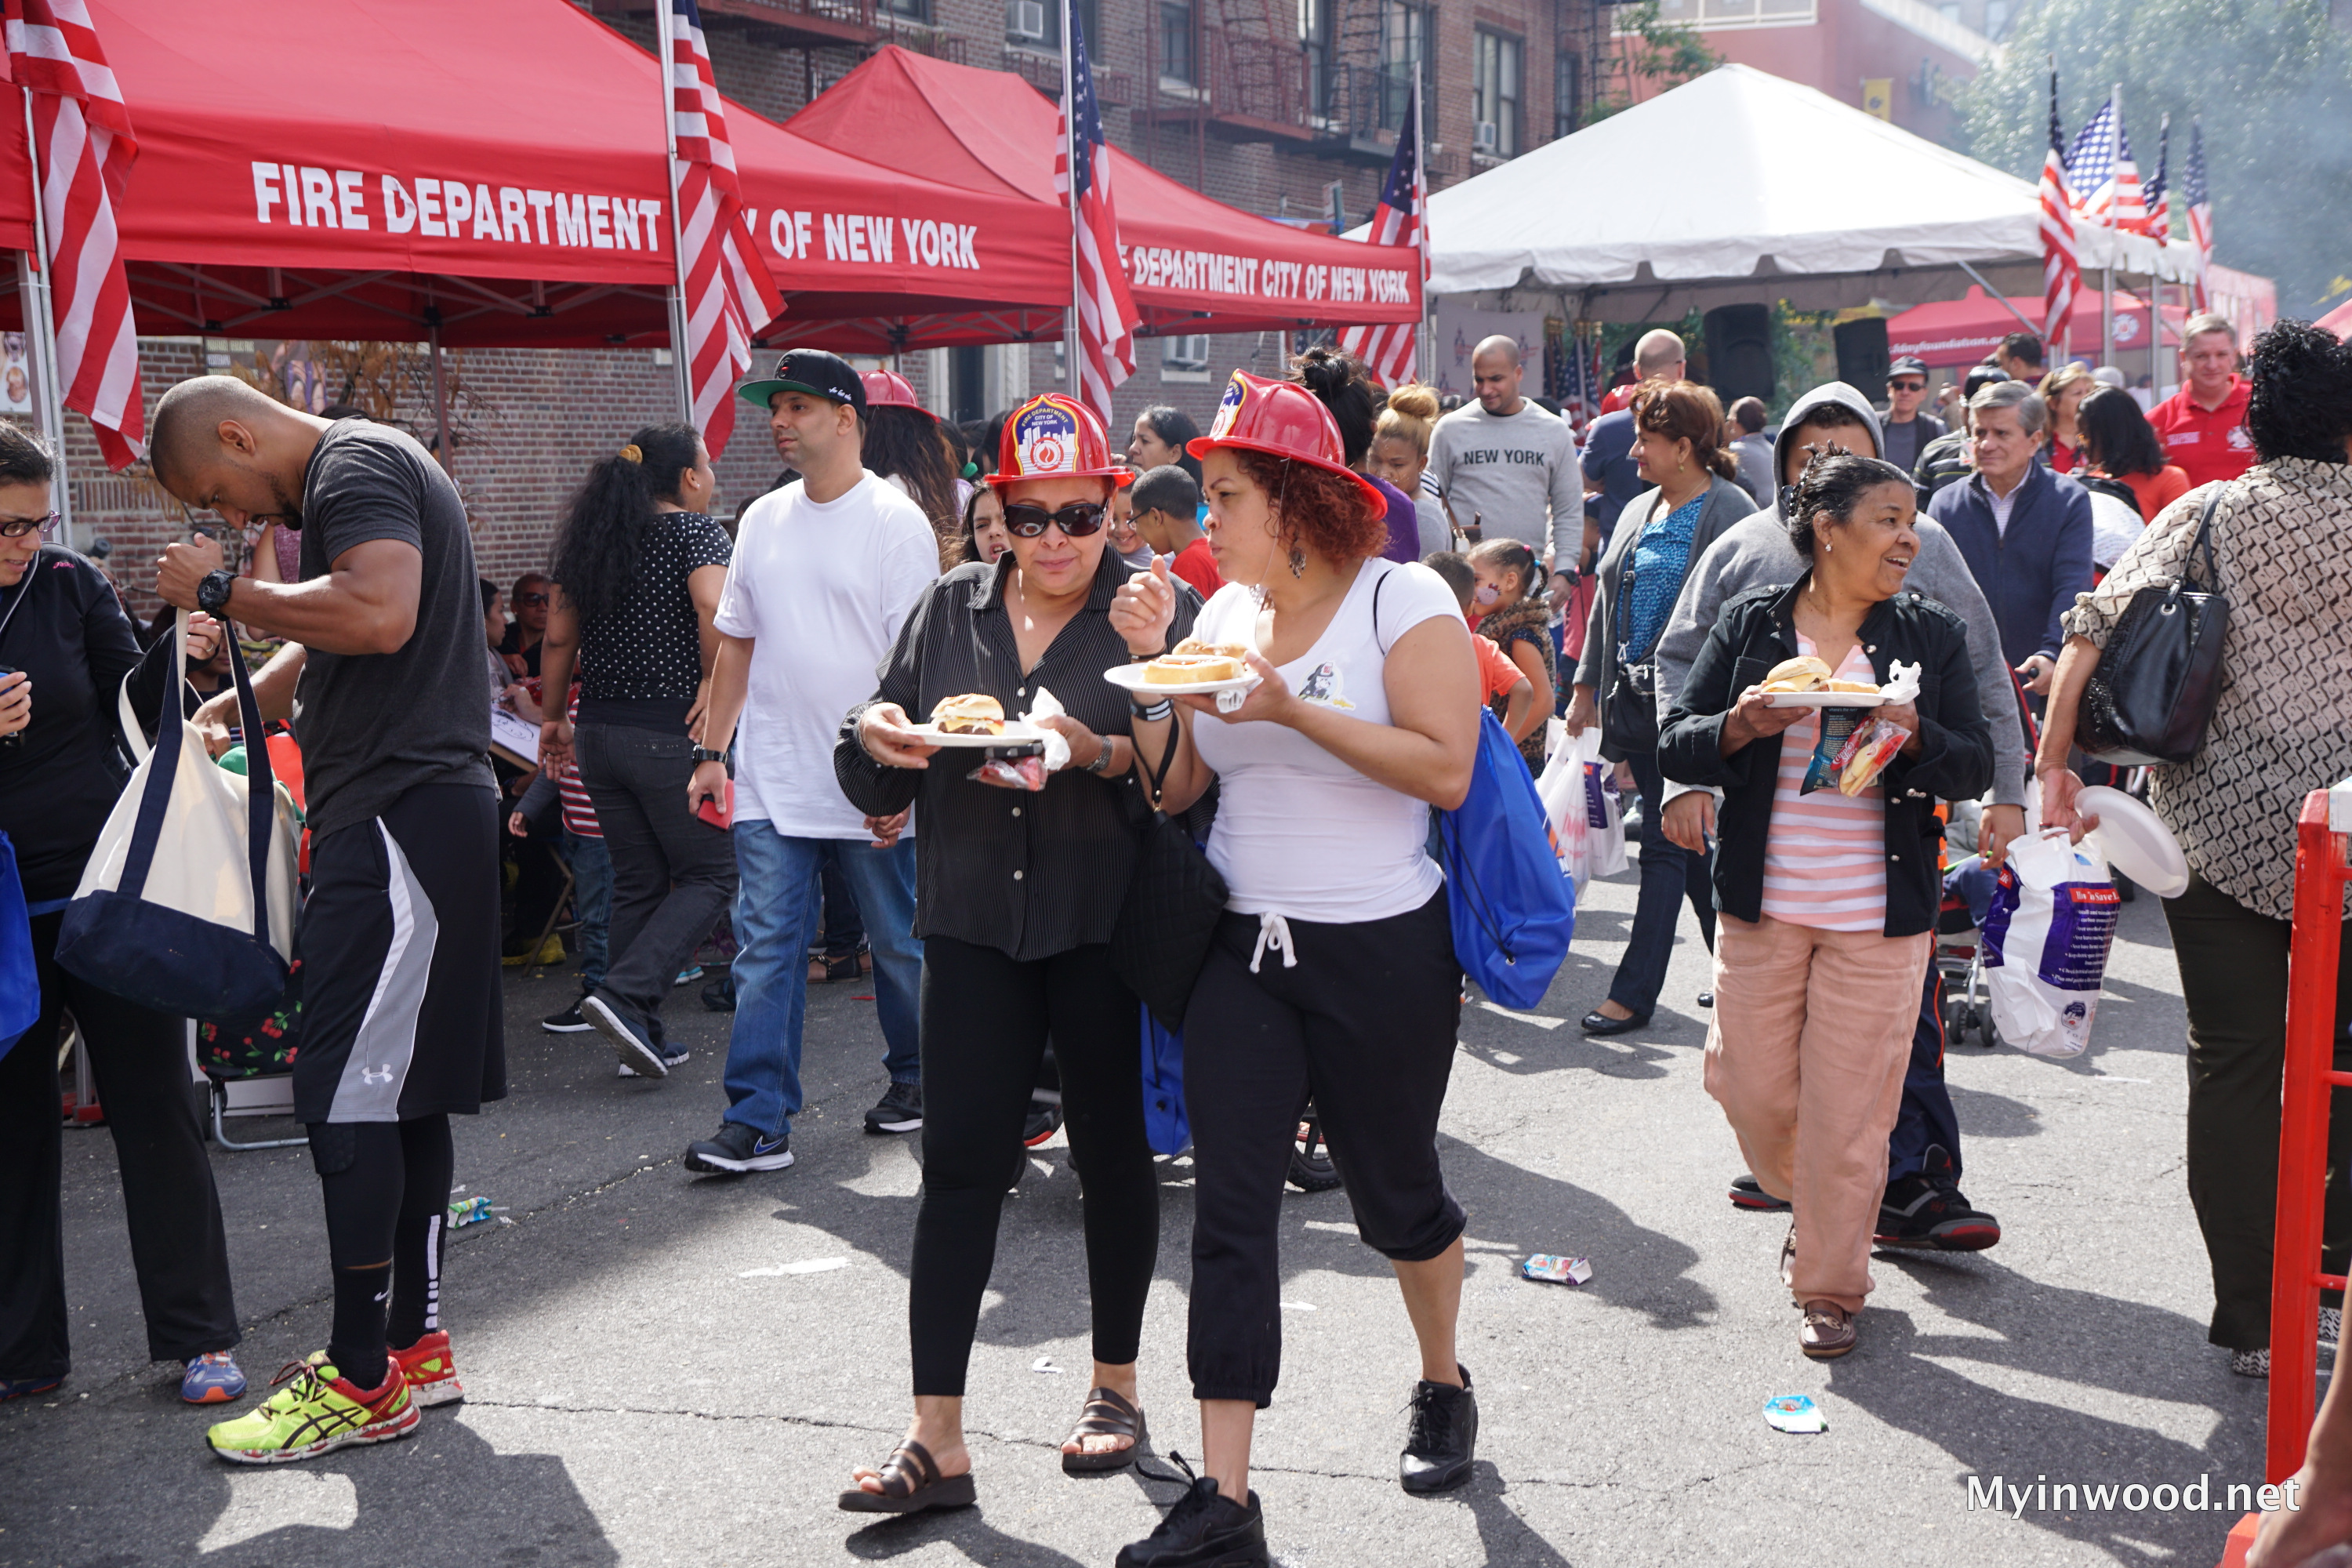 FDNY block party on September 26, 2015 celebrating 150 Years of FDNY and Centennial of Inwood Fire Department.